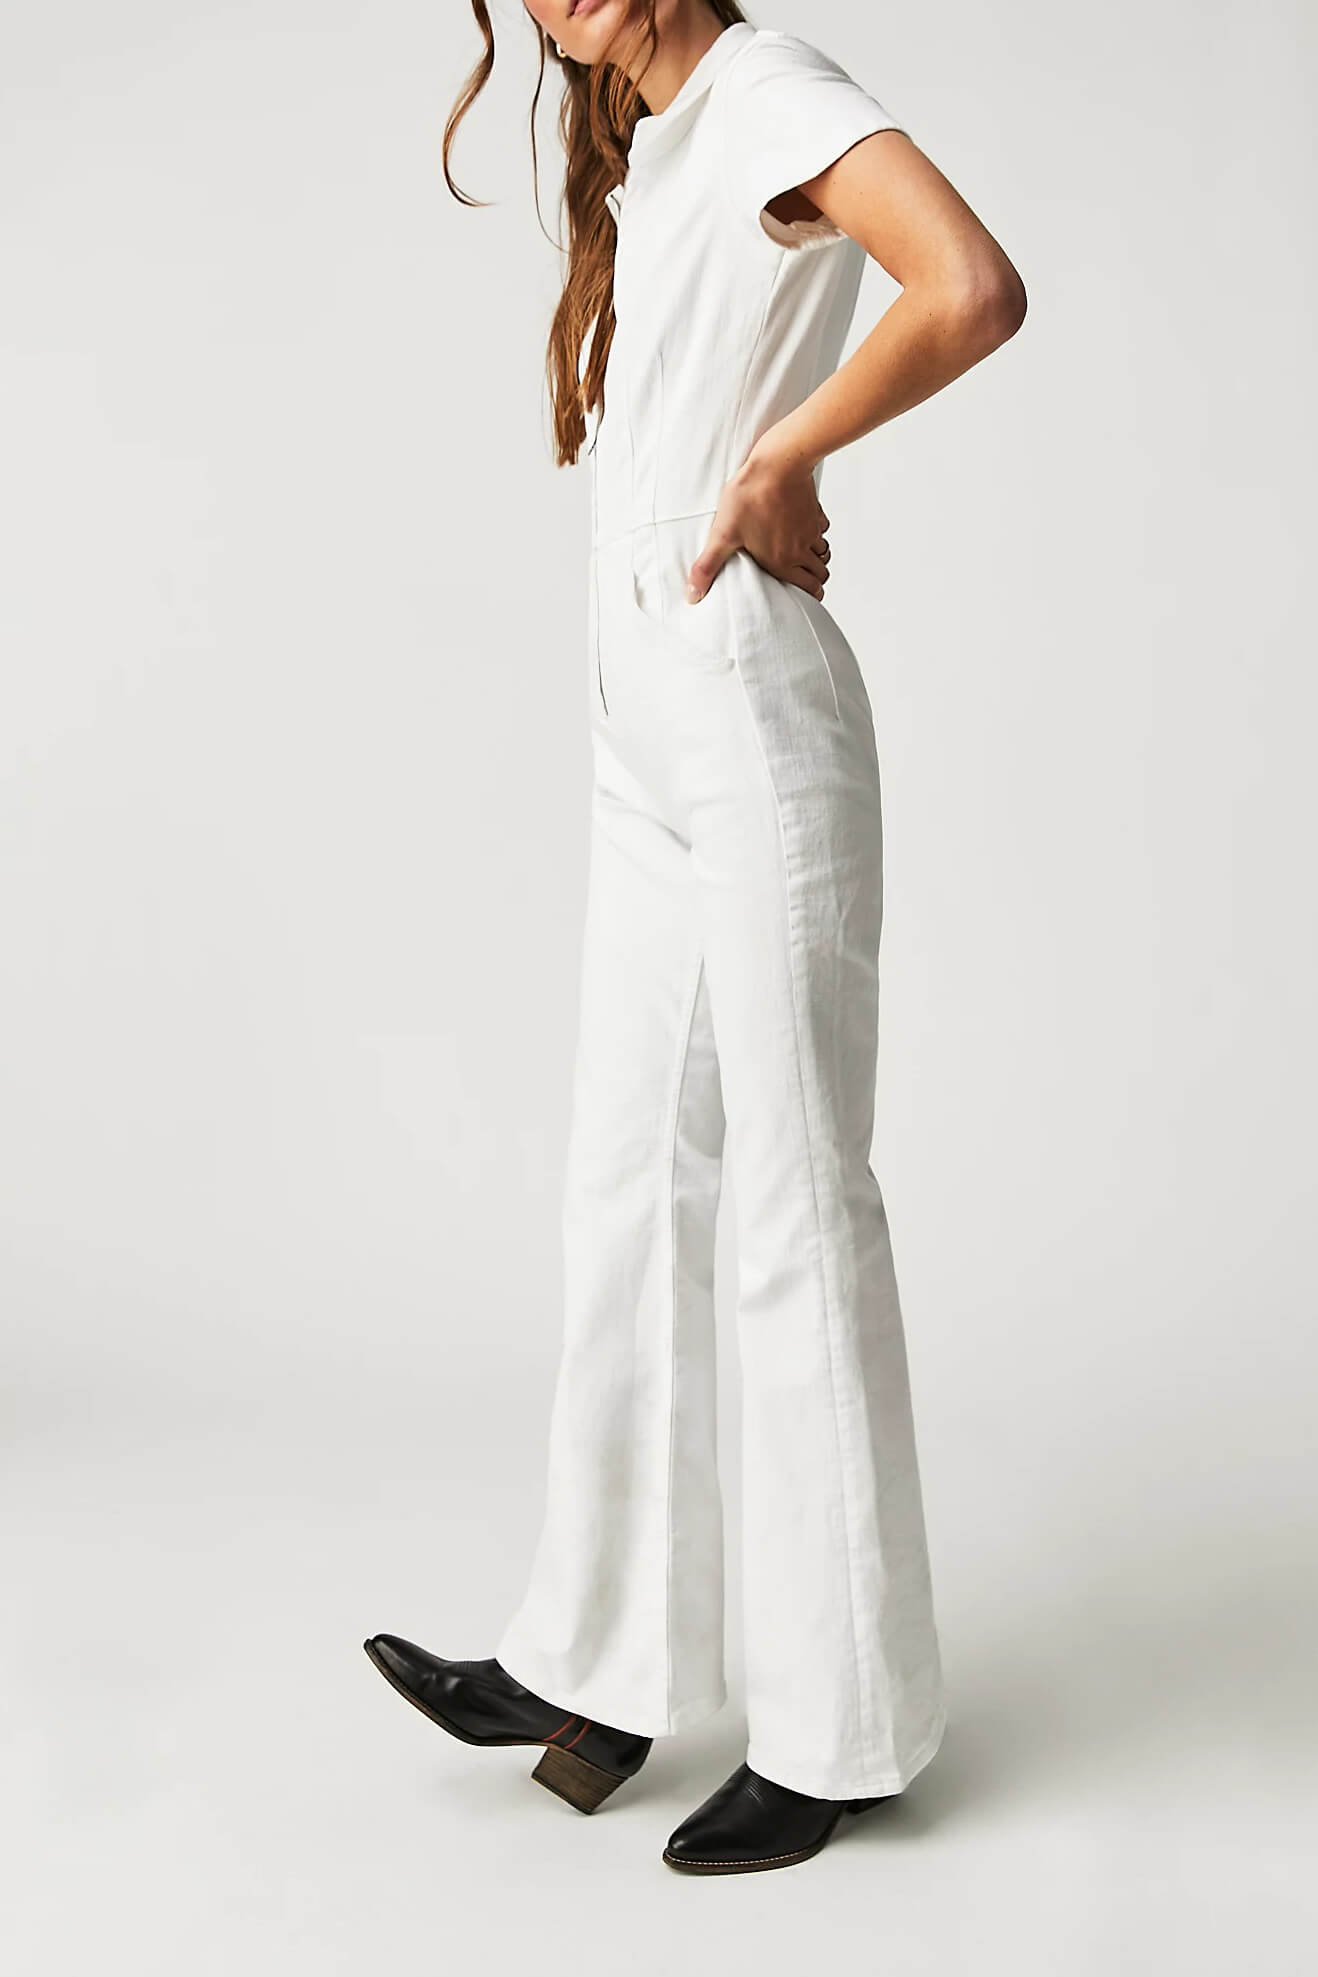 Free People jayde flare jumpsuit in pure white